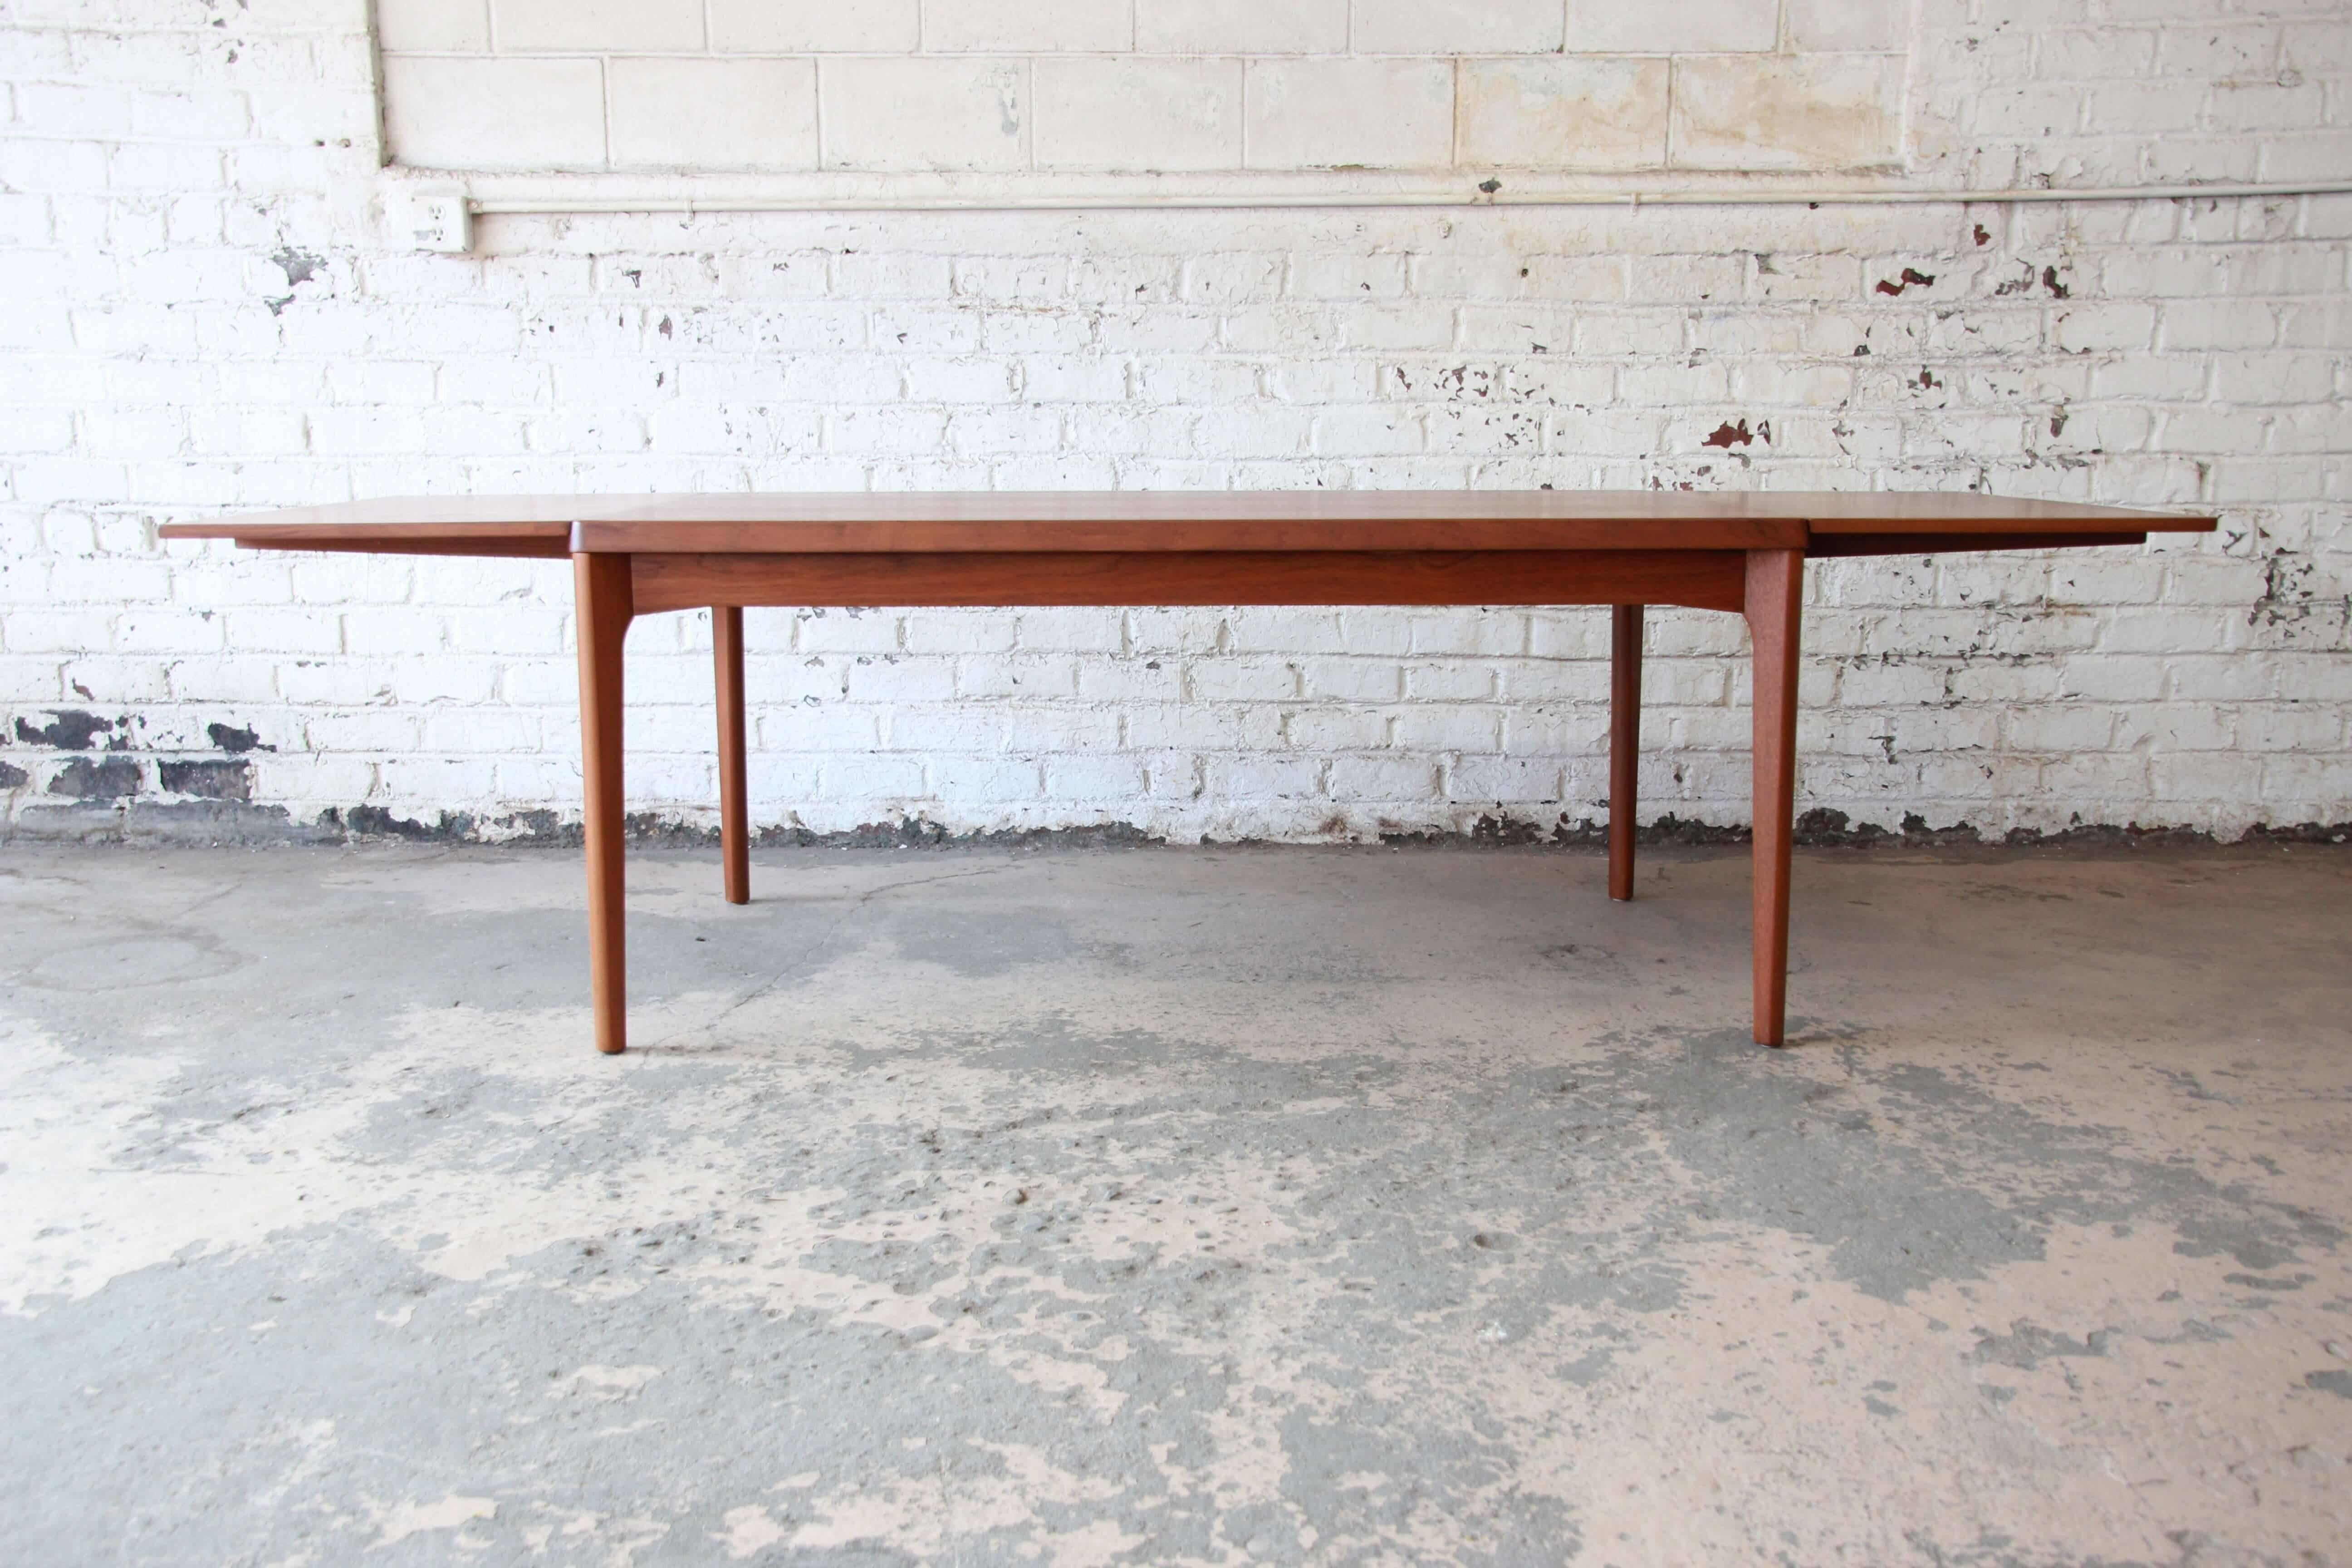 Offering an exceptional Danish Modern teak extension dining table designed by Henning Kjaernulf for Vejle Stole Mobelfabrik. The table features gorgeous teak wood grain and clean Mid-Century lines. There are stored leaves on each side of the table